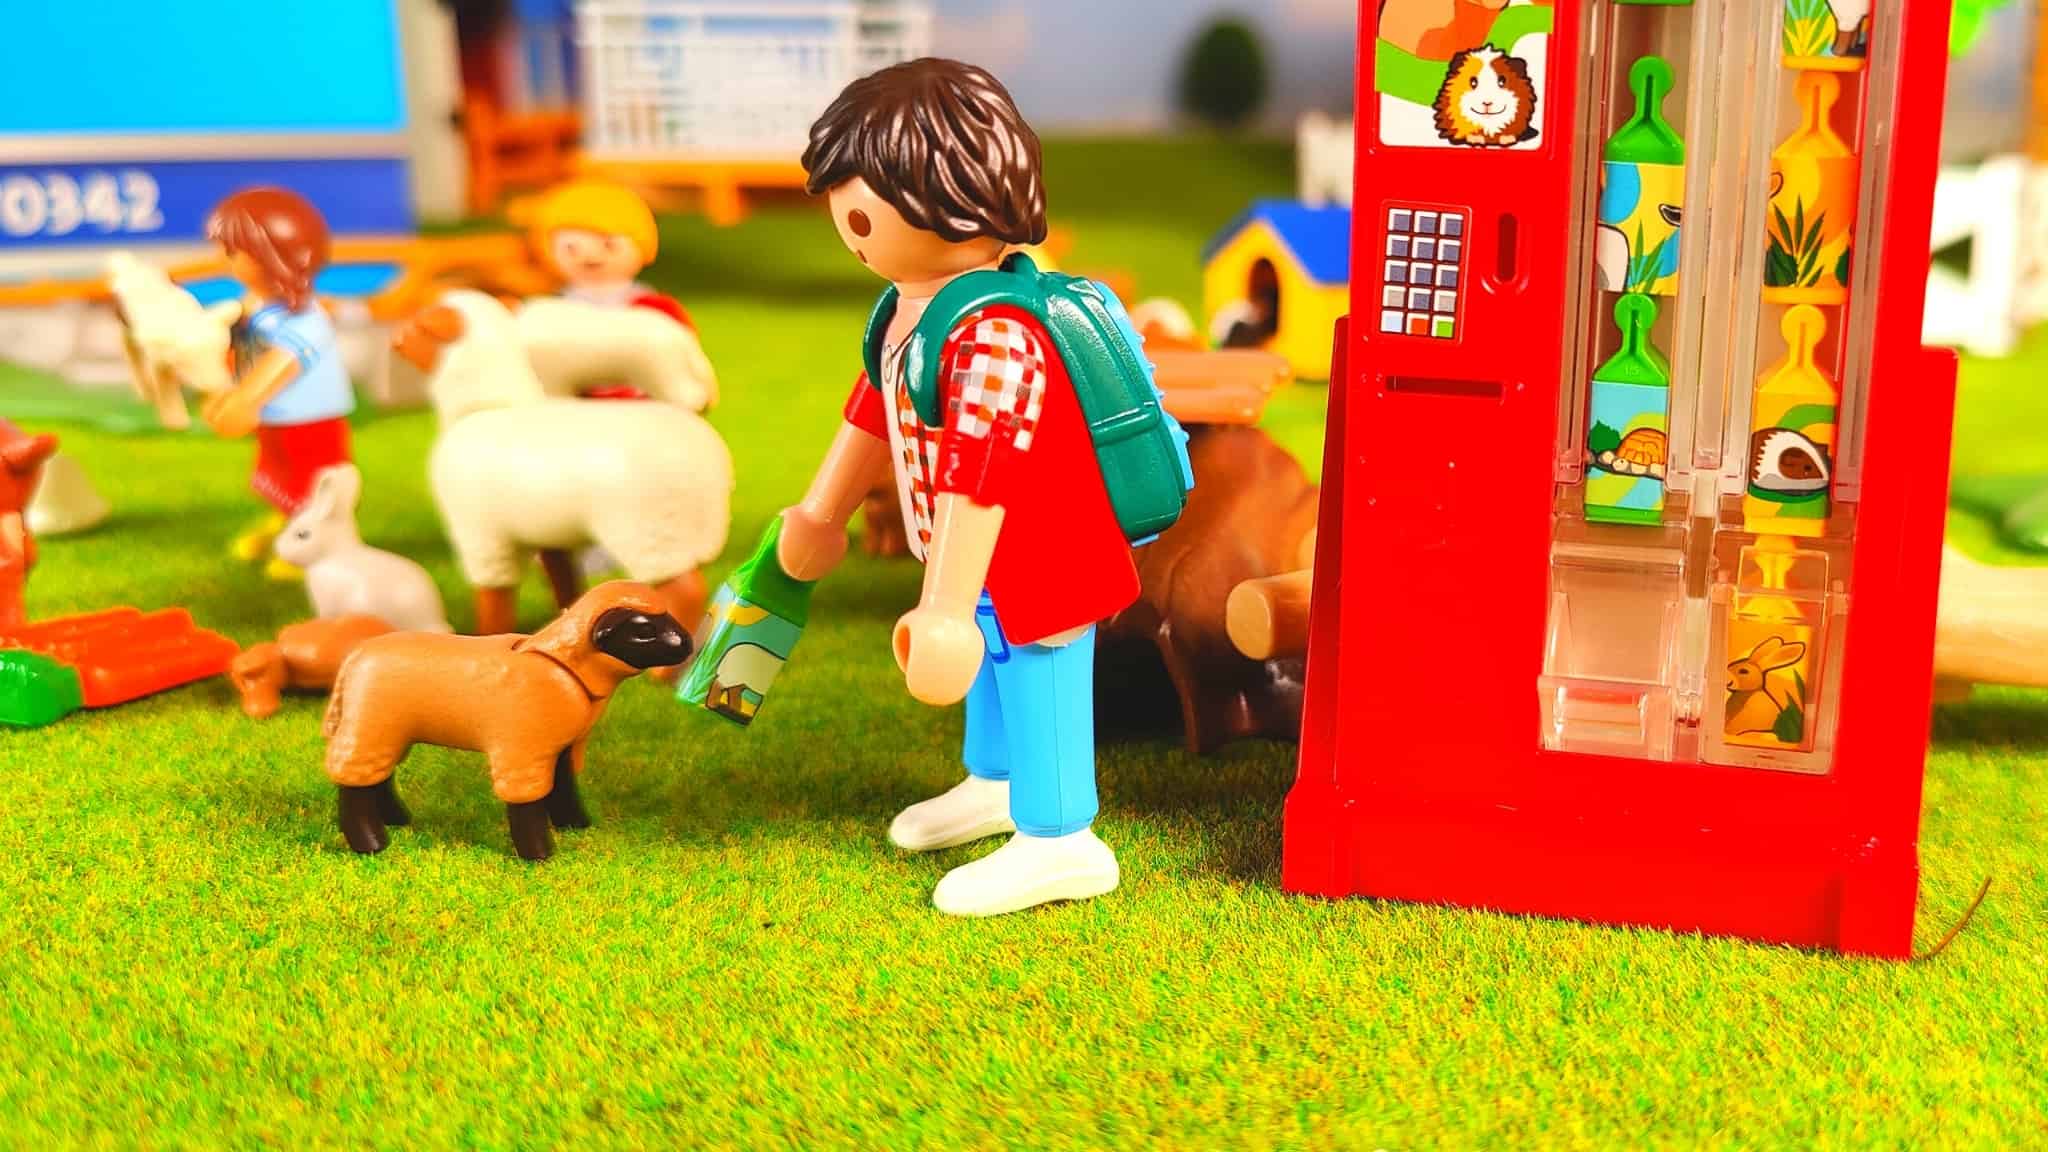 Get food from the vending machine at the petting zoo